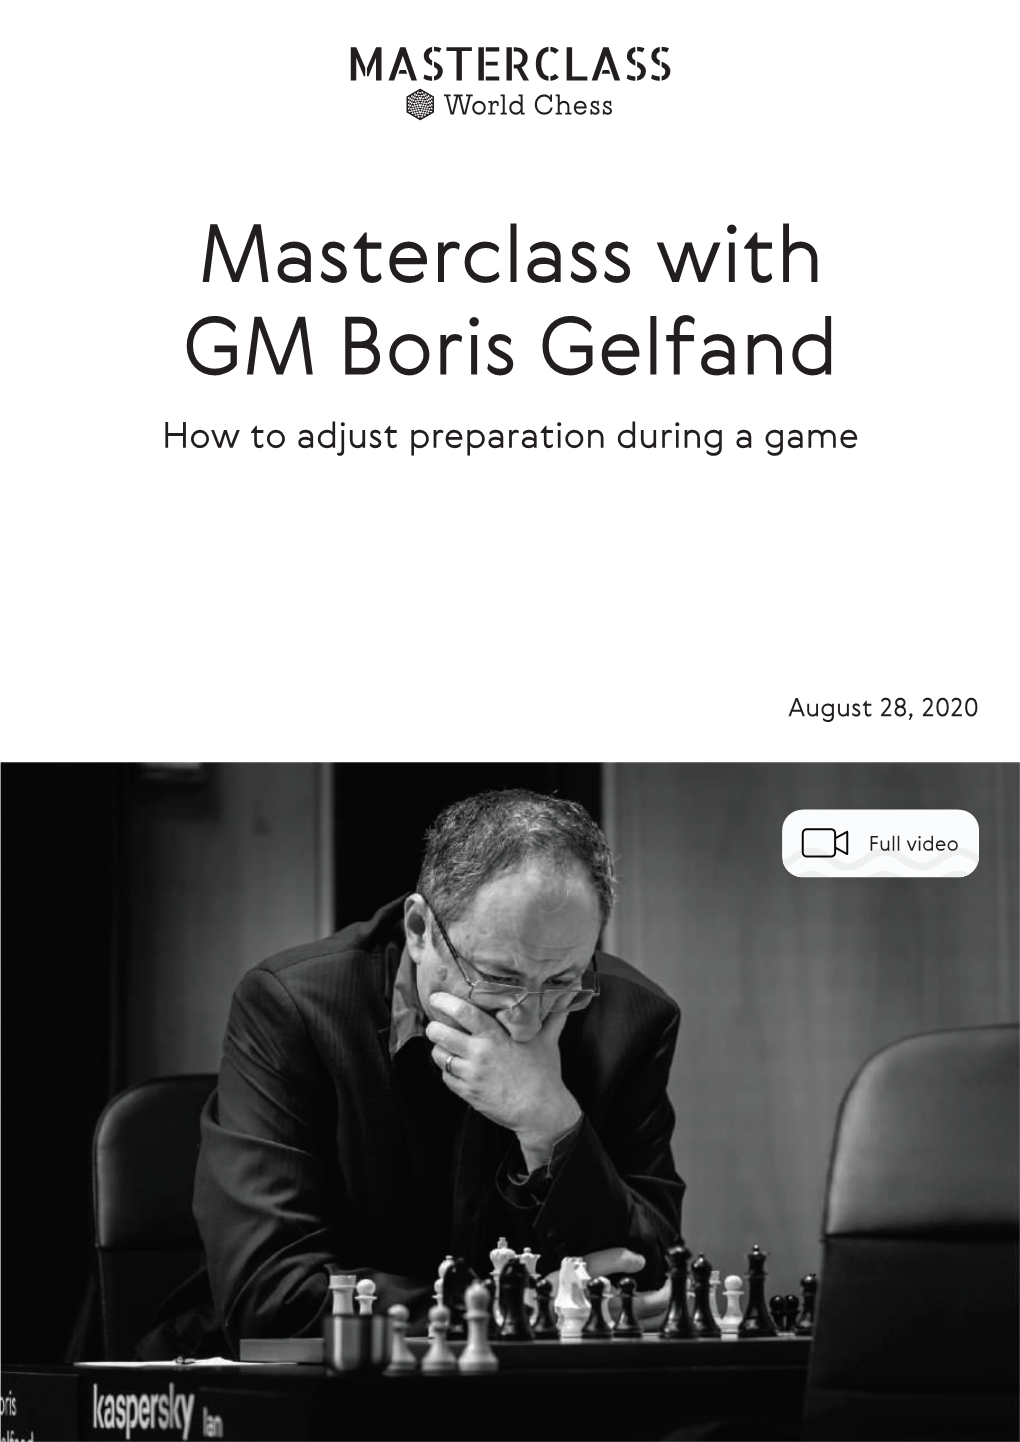 Masterclass with GM Boris Gelfand How to Adjust Preparation During a Game